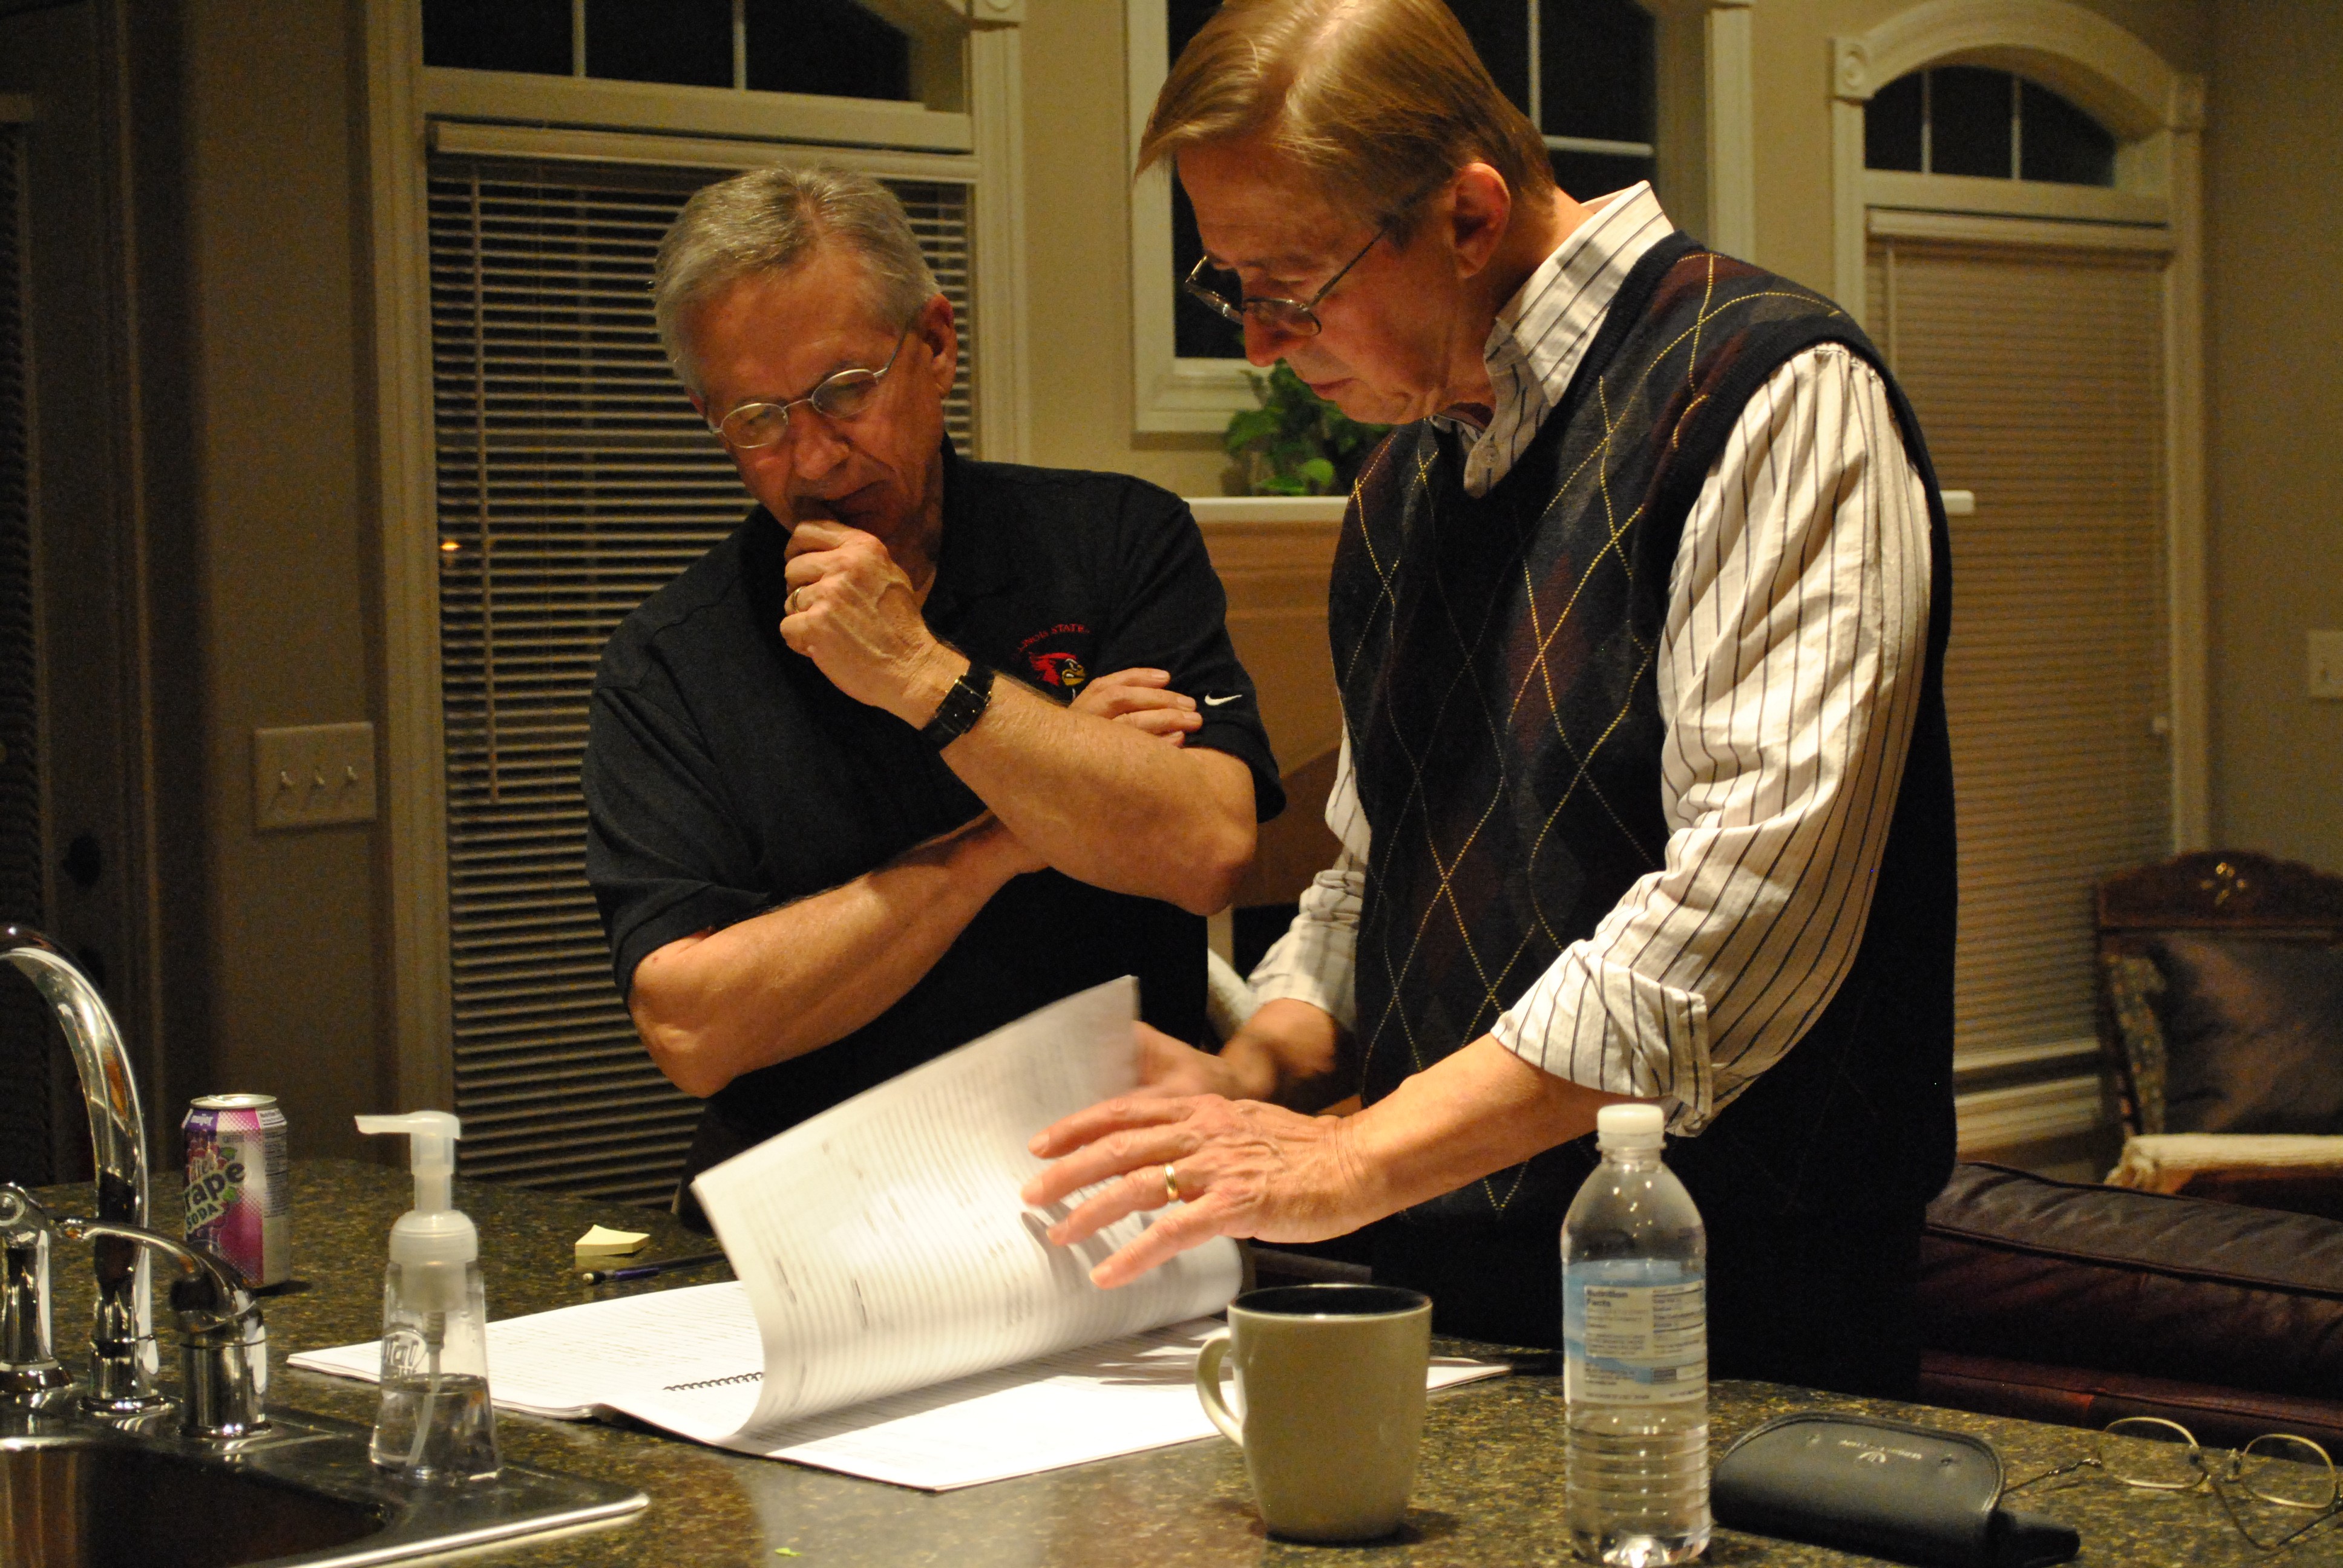 Stephen K. Steele and David Maslanka looking through one of his scores near a kitchen sink.